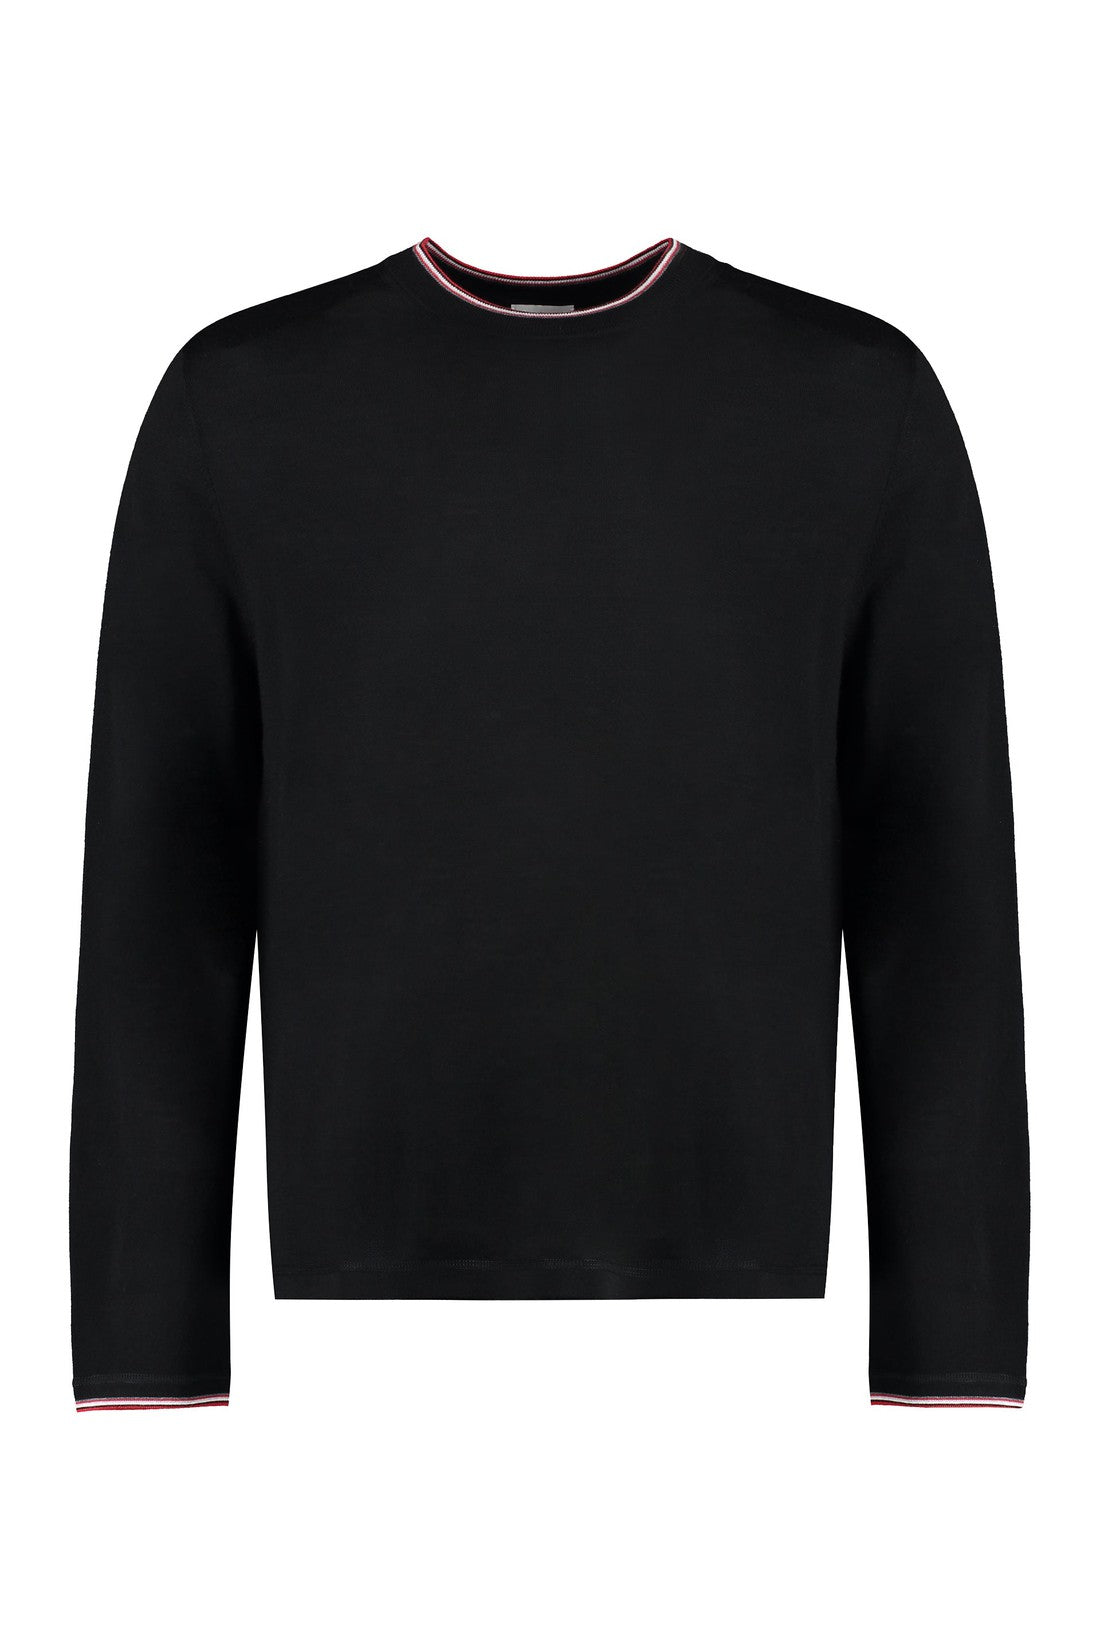 Paul Smith-OUTLET-SALE-Merino wool sweater-ARCHIVIST